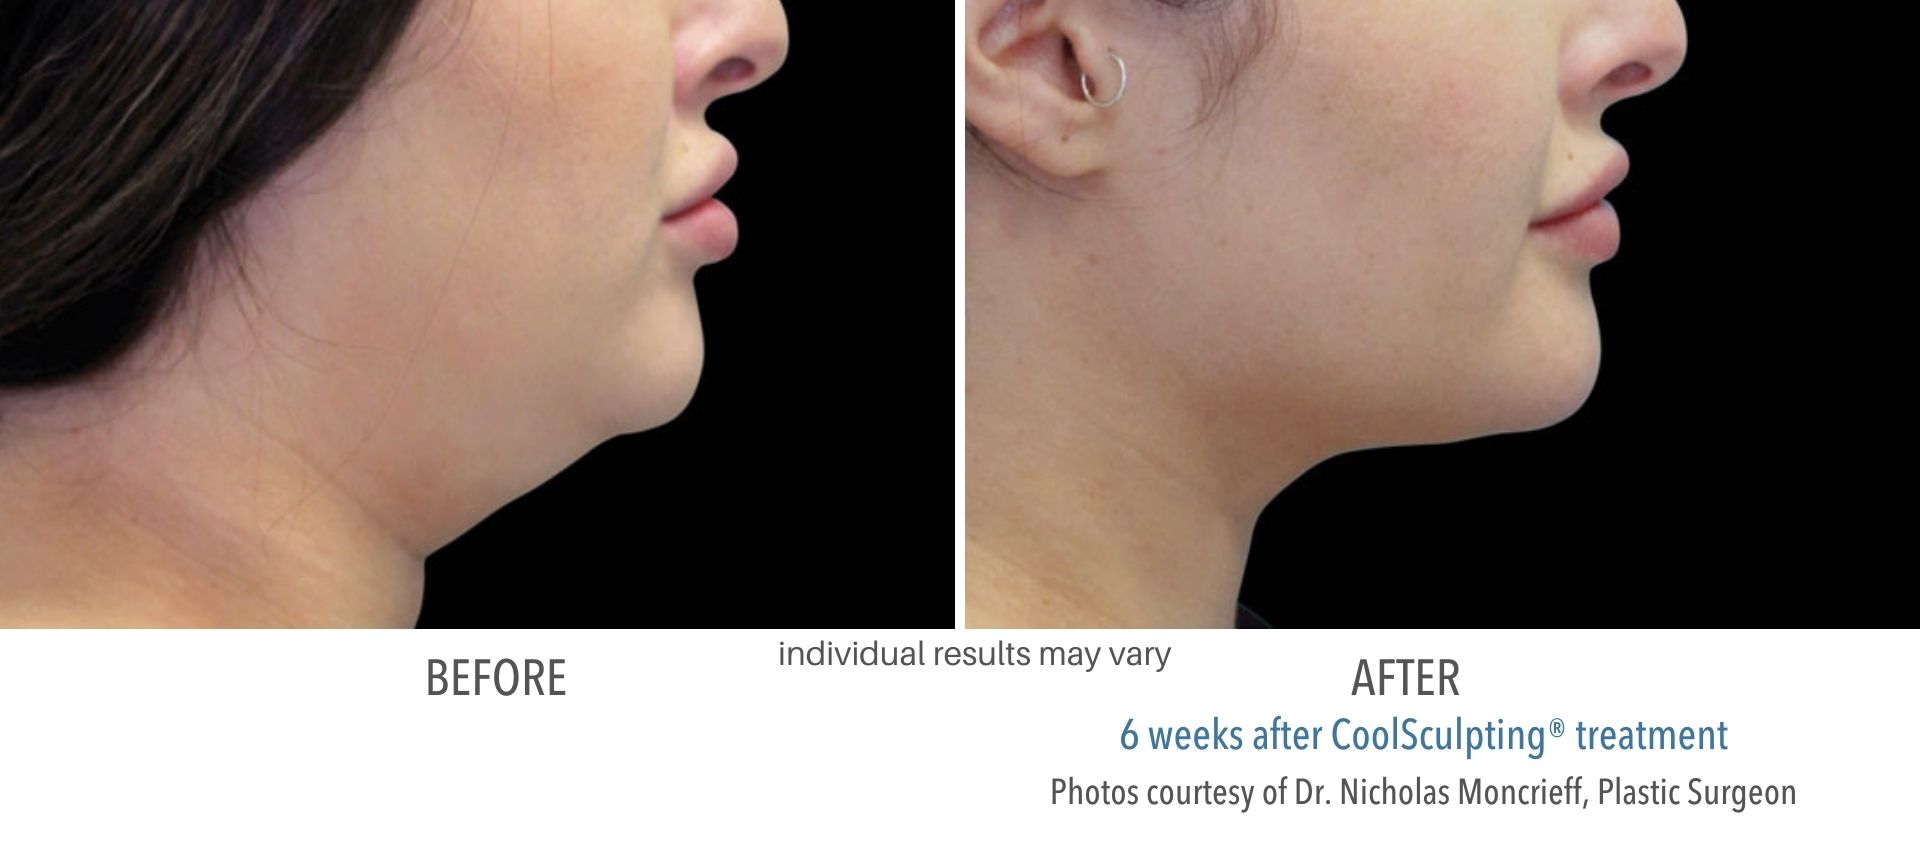 CoolSculpting double chin treatment in Westlake, OH